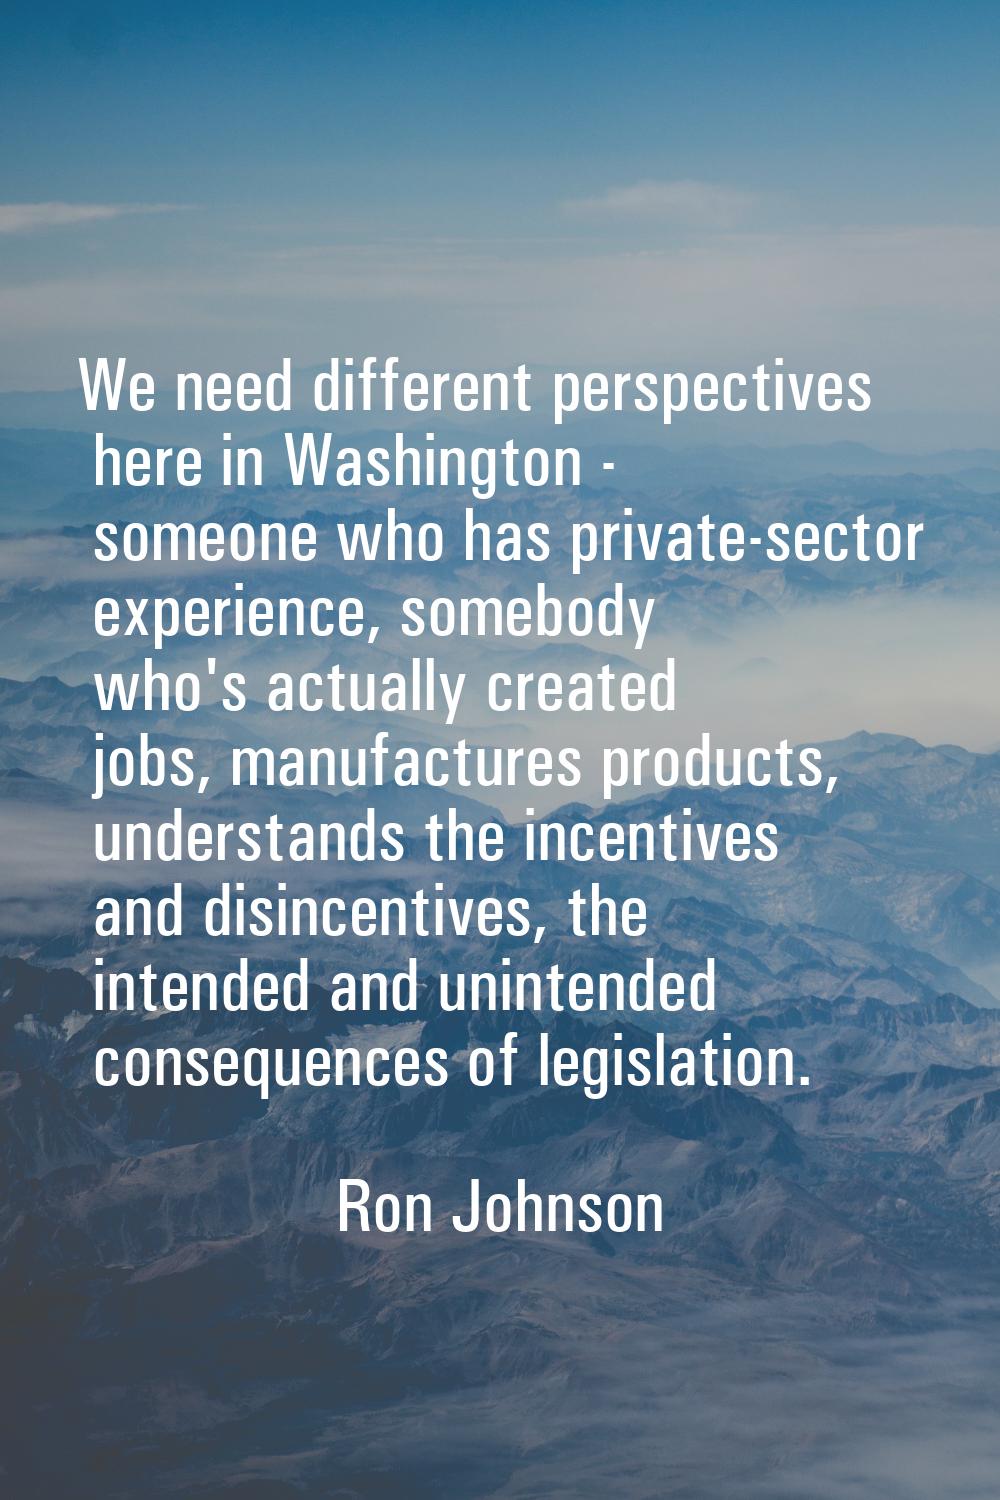 We need different perspectives here in Washington - someone who has private-sector experience, some